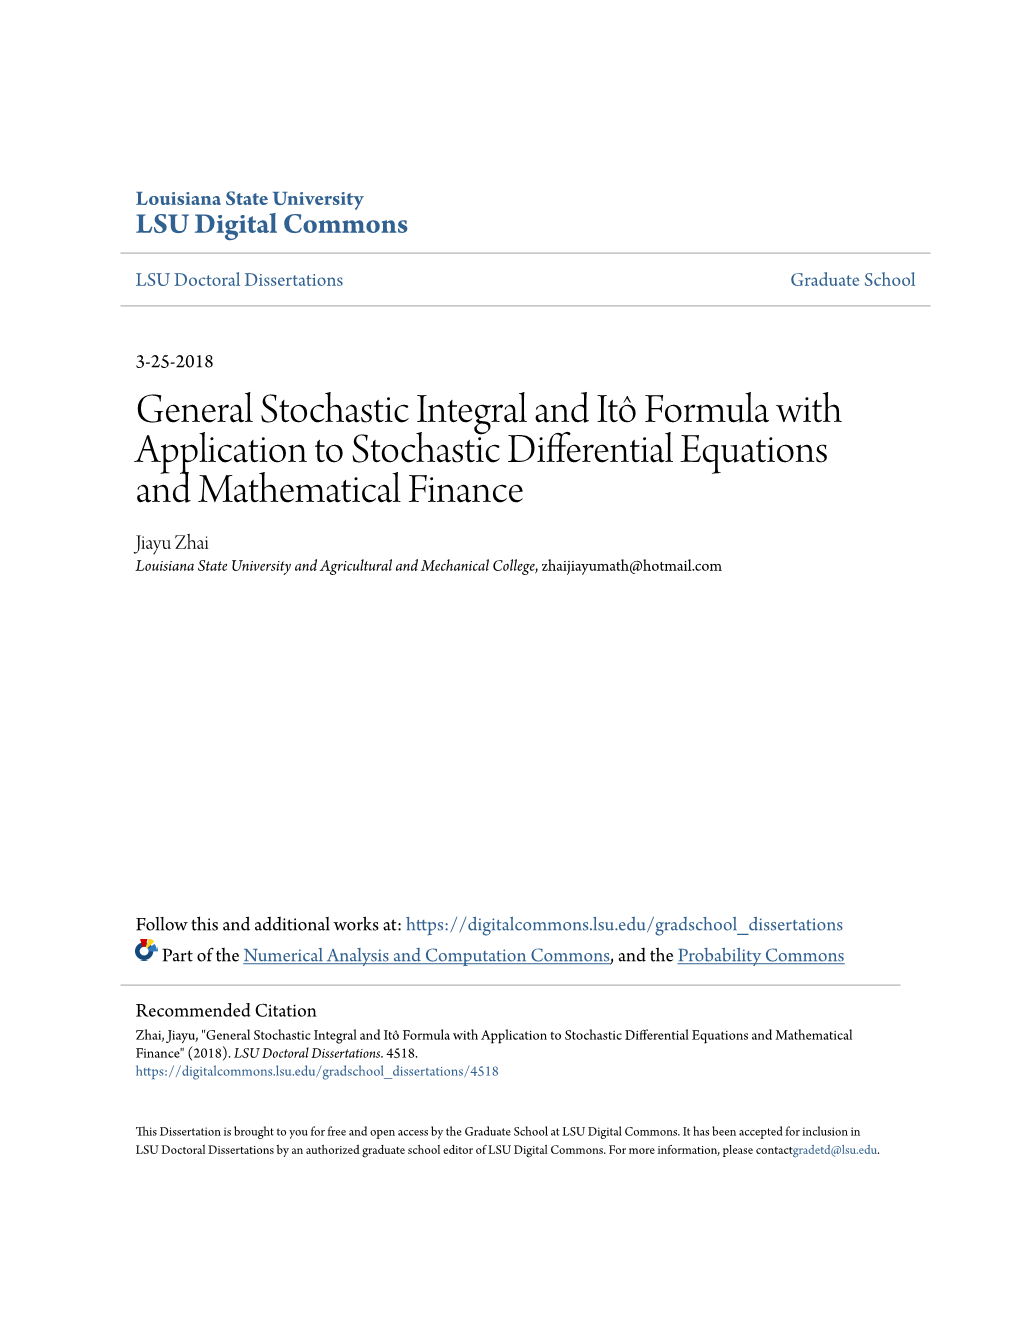 General Stochastic Integral and Itô Formula with Application To